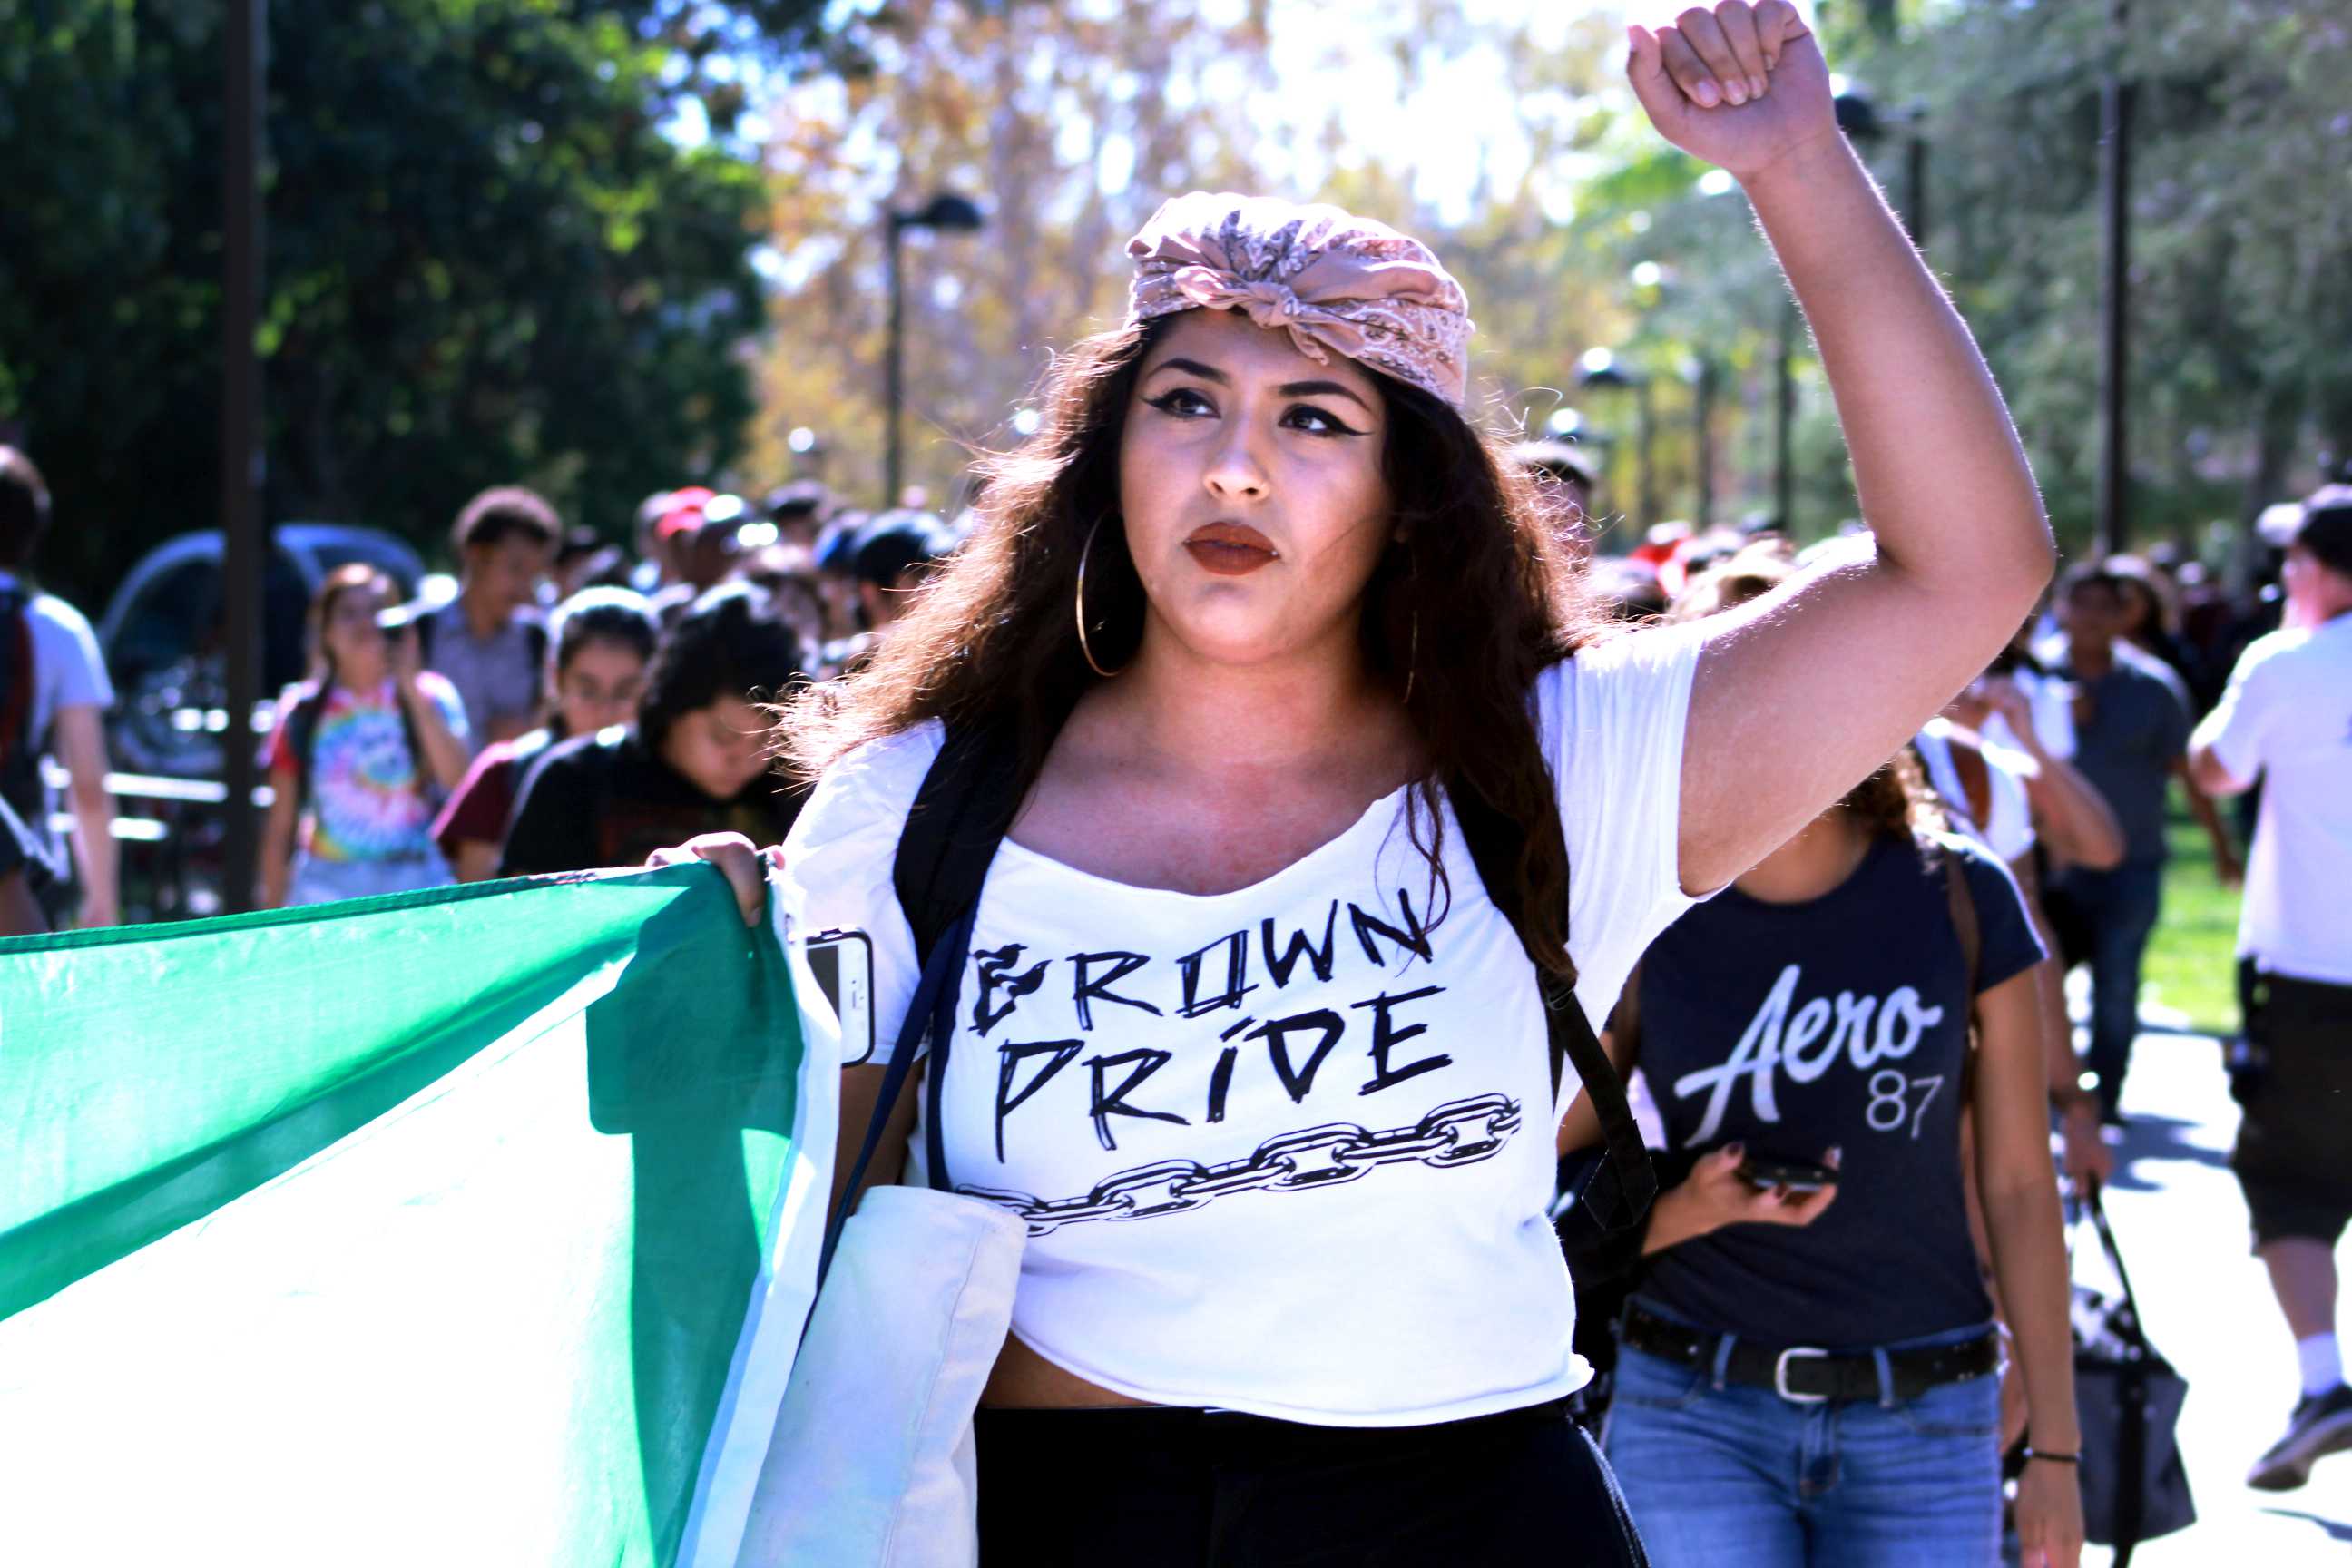 Students+march+in+protest+of+Trumps+election+holding+up+Mexican+flag